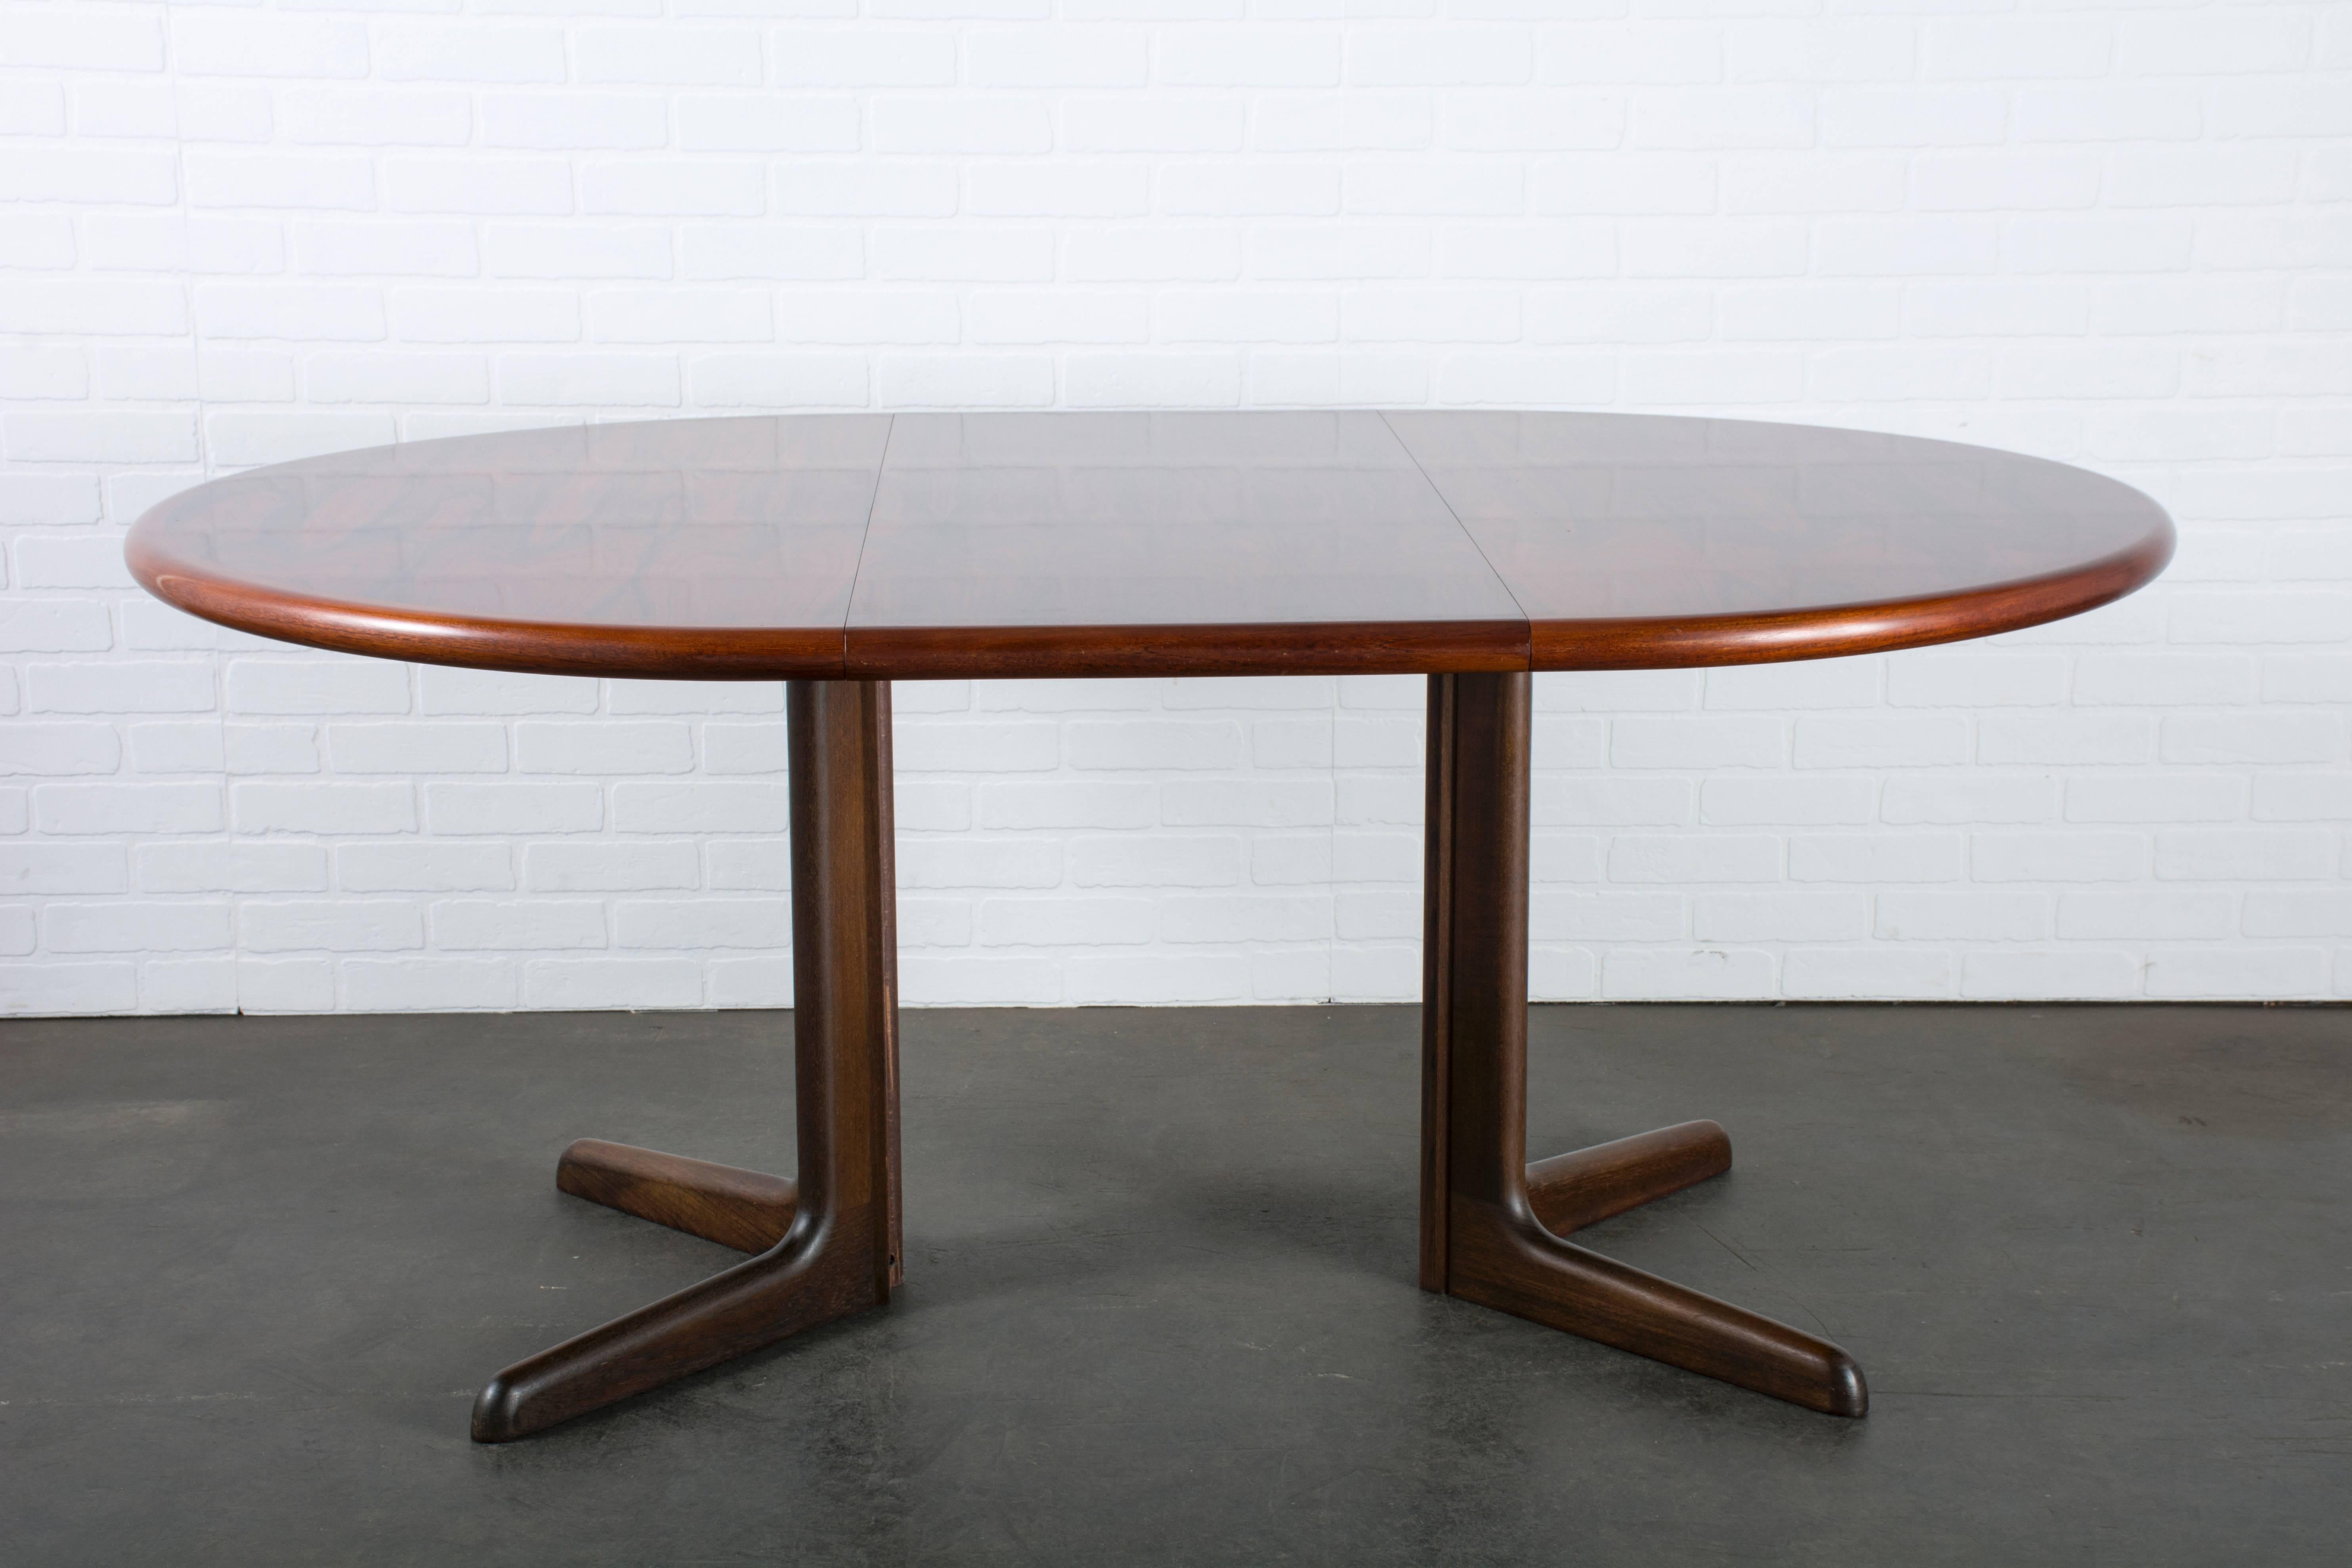 Mid-20th Century Danish Modern Rosewood Dining Table with Leaves by Gudme Mobelfabrik